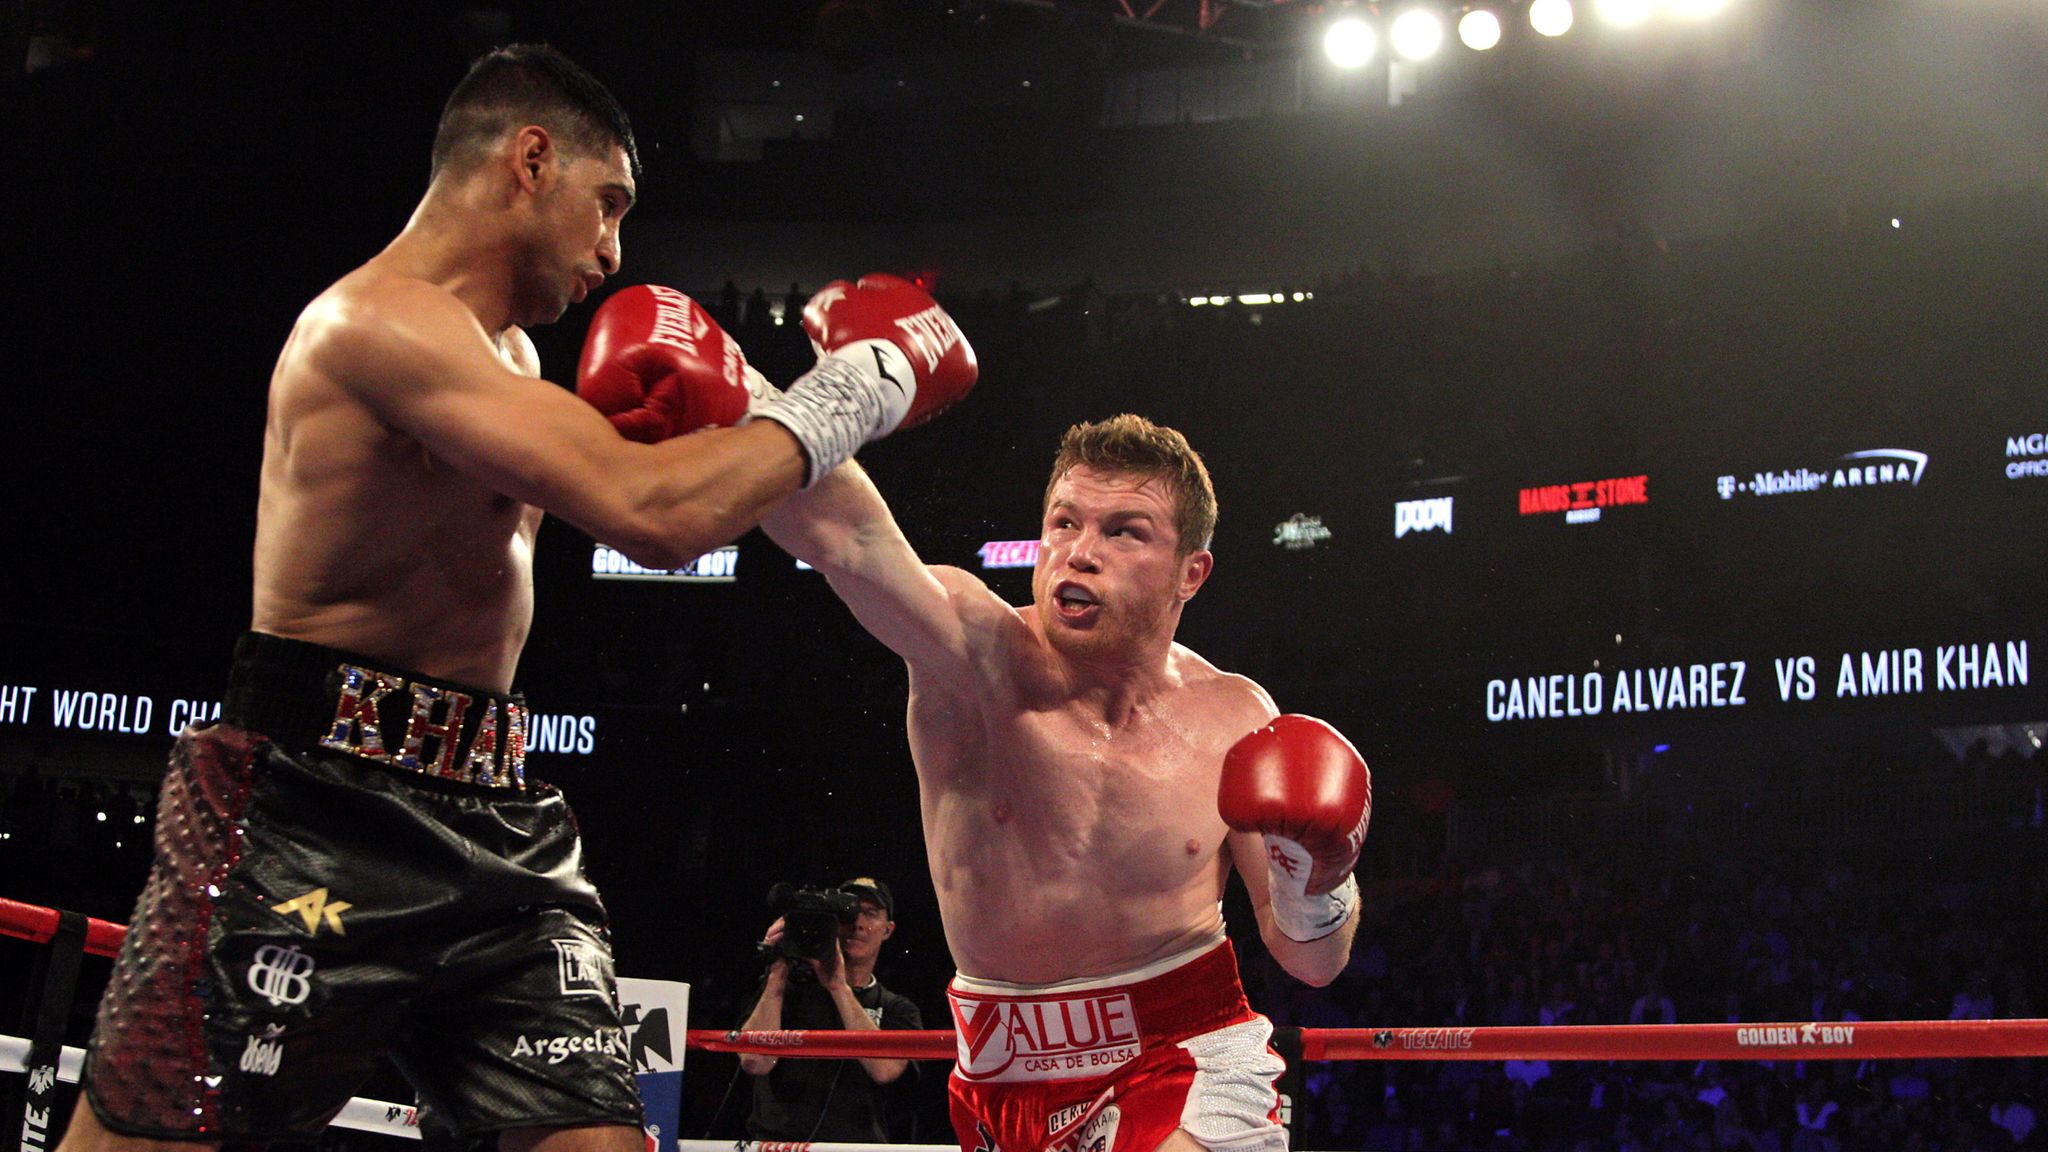 Amir Khan is brutally knocked out in the sixth round by Saul Alvarez Boxing News Sky Sports